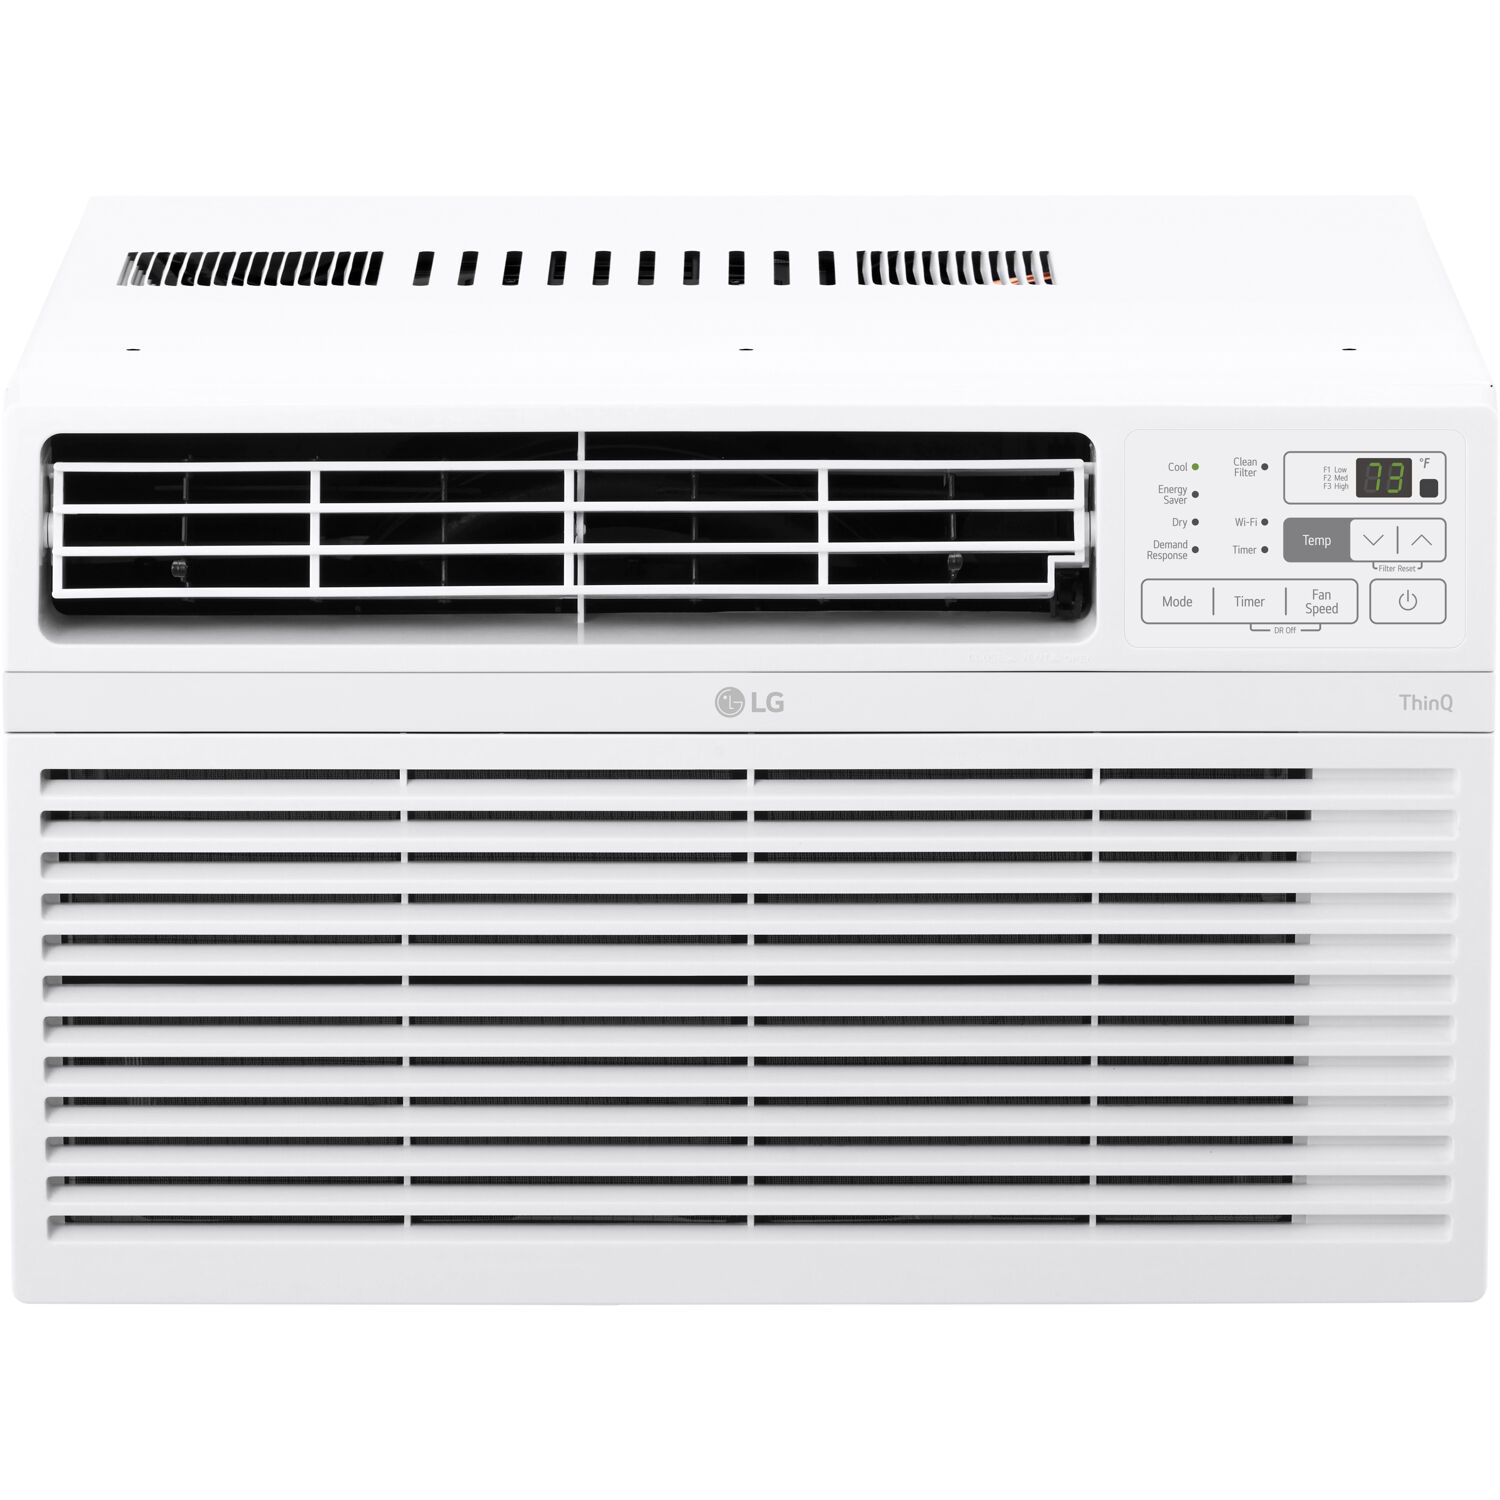 LG 8,000 BTU 115V Window-Mounted Air Conditioner with Wi-Fi Control - image 1 of 11